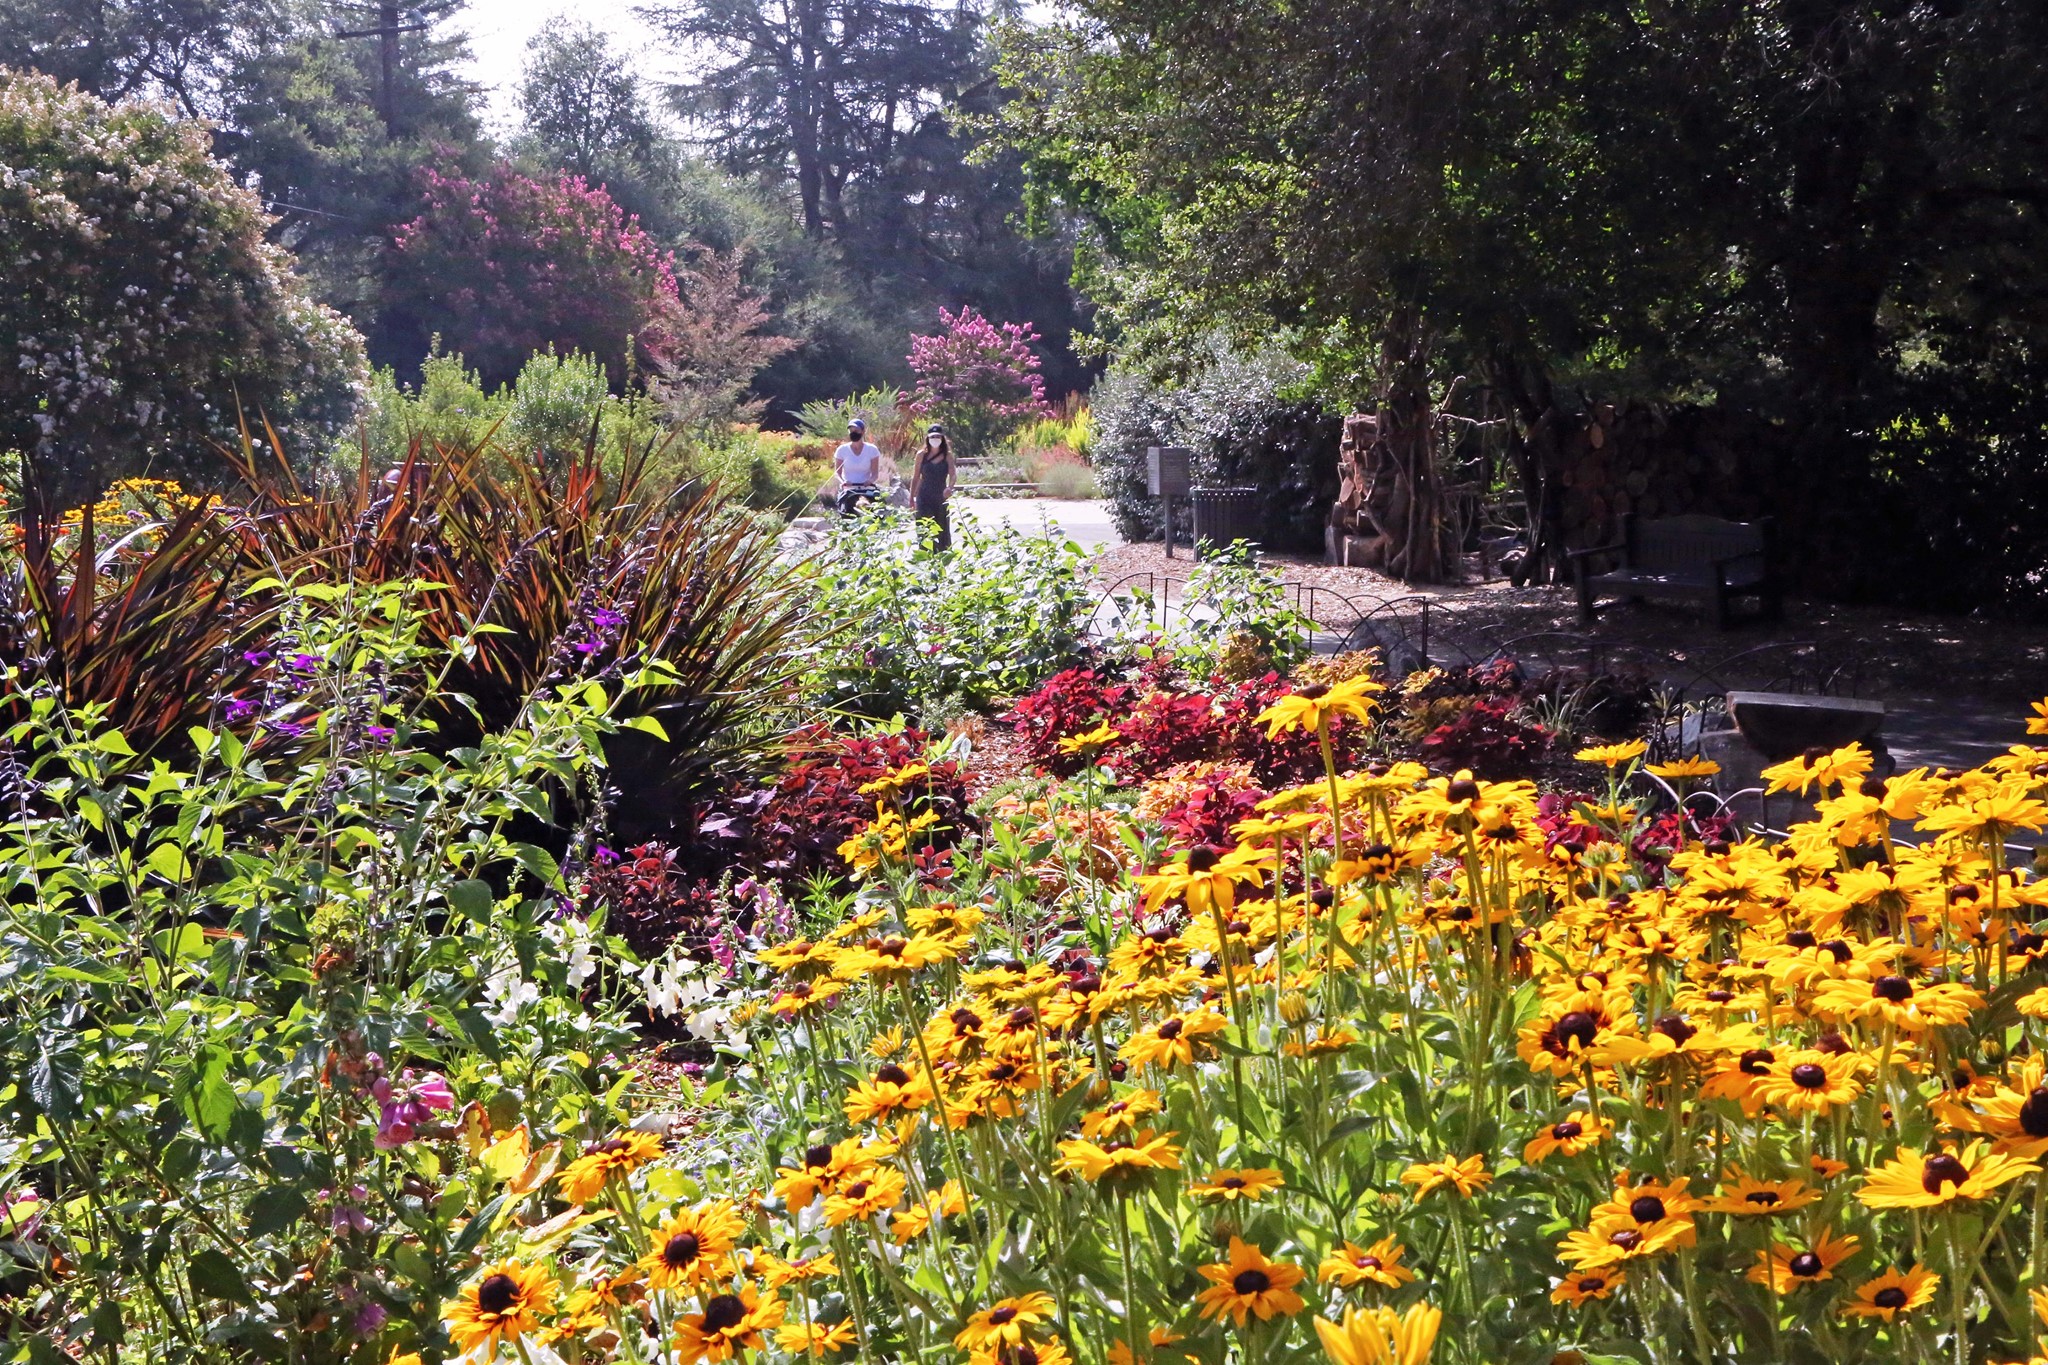 The Descanso Gardens Has Over 1,600 Roses In Bloom In SoCal